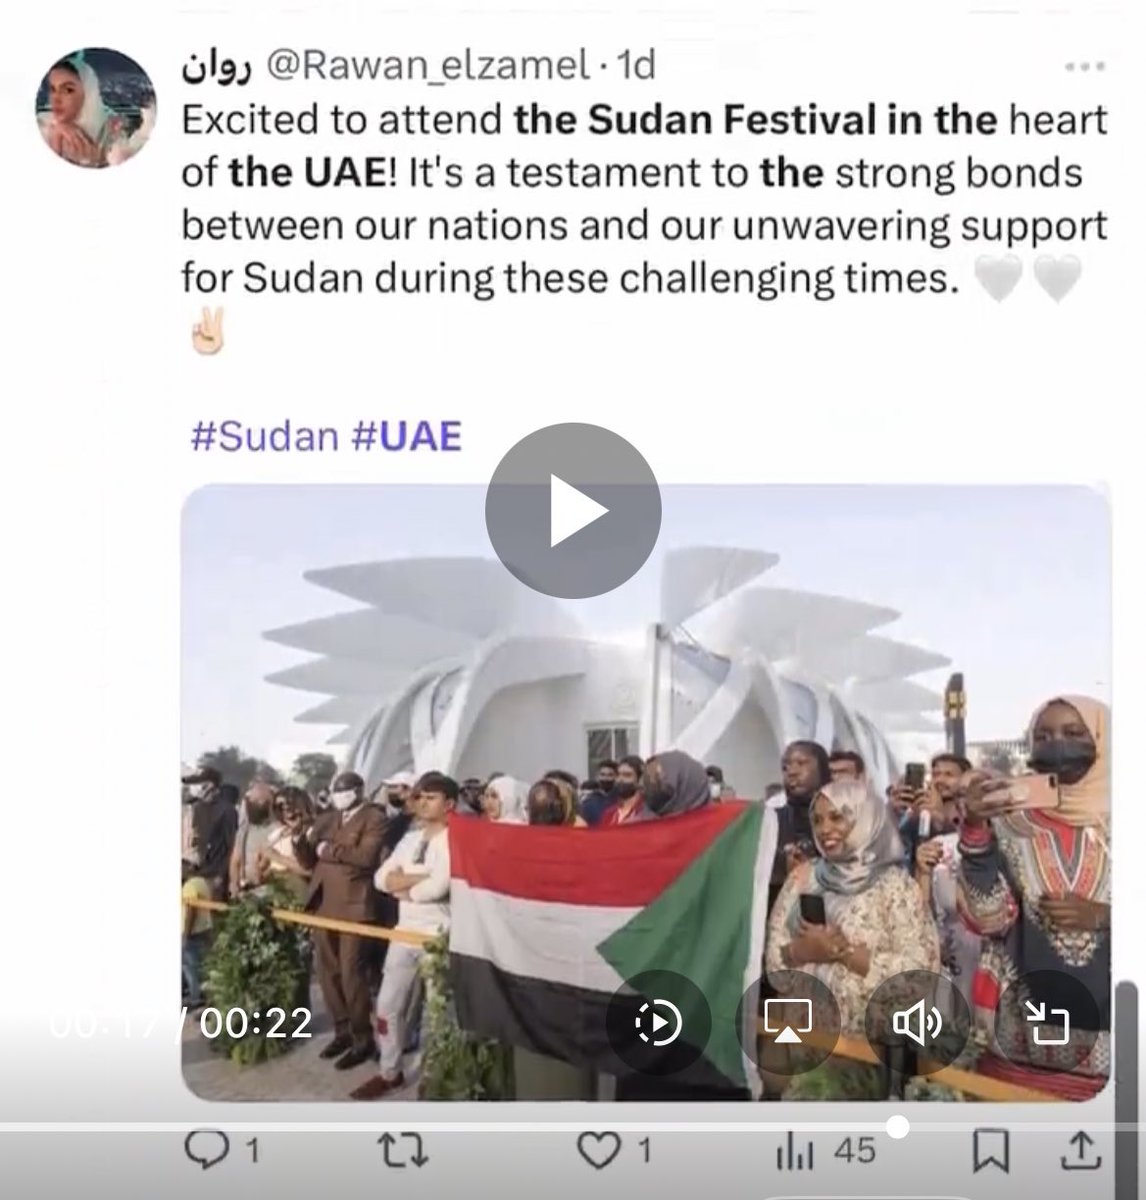 ‘our unwavering support for sudan during these challenging times’ yeah your support for the rsf💀